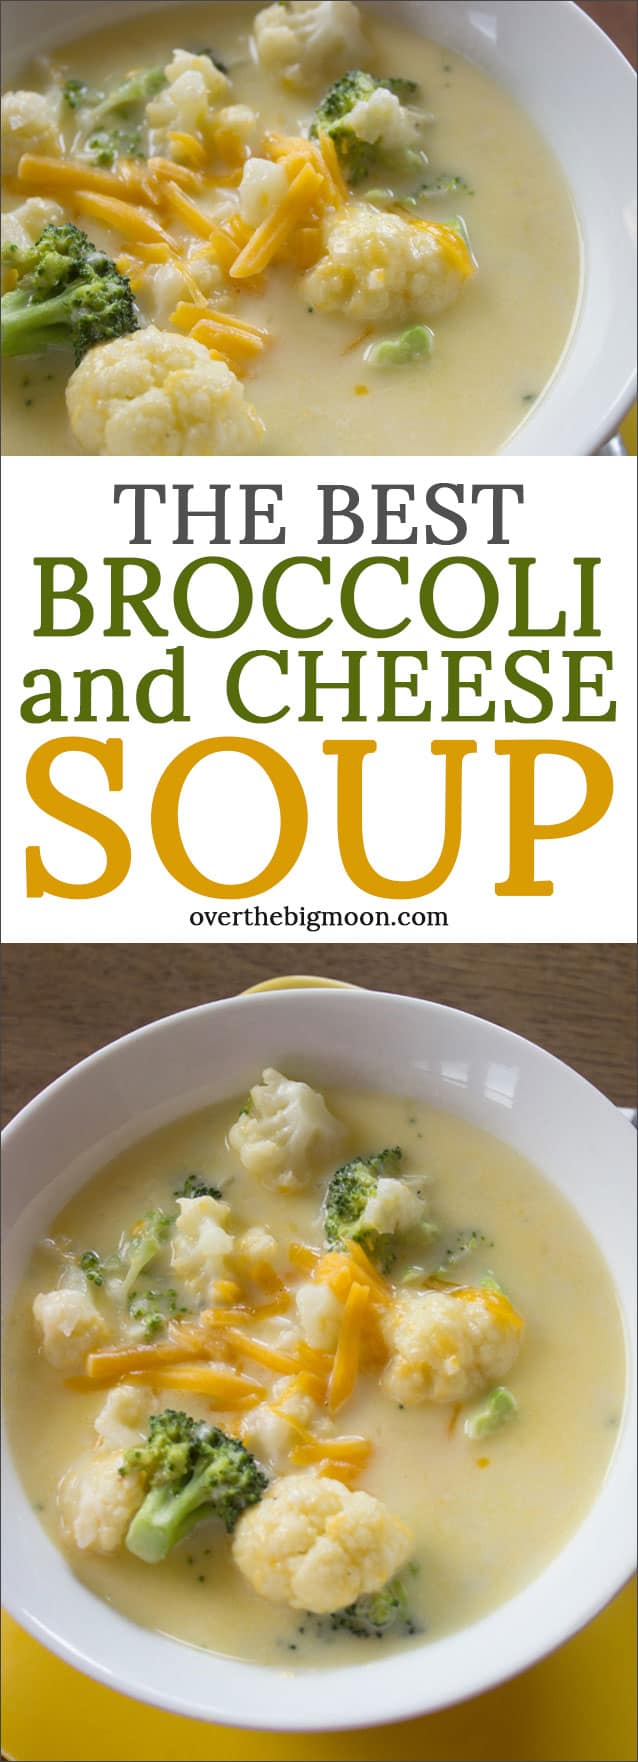 The Best Broccoli Cheese Soup - Over the Big Moon